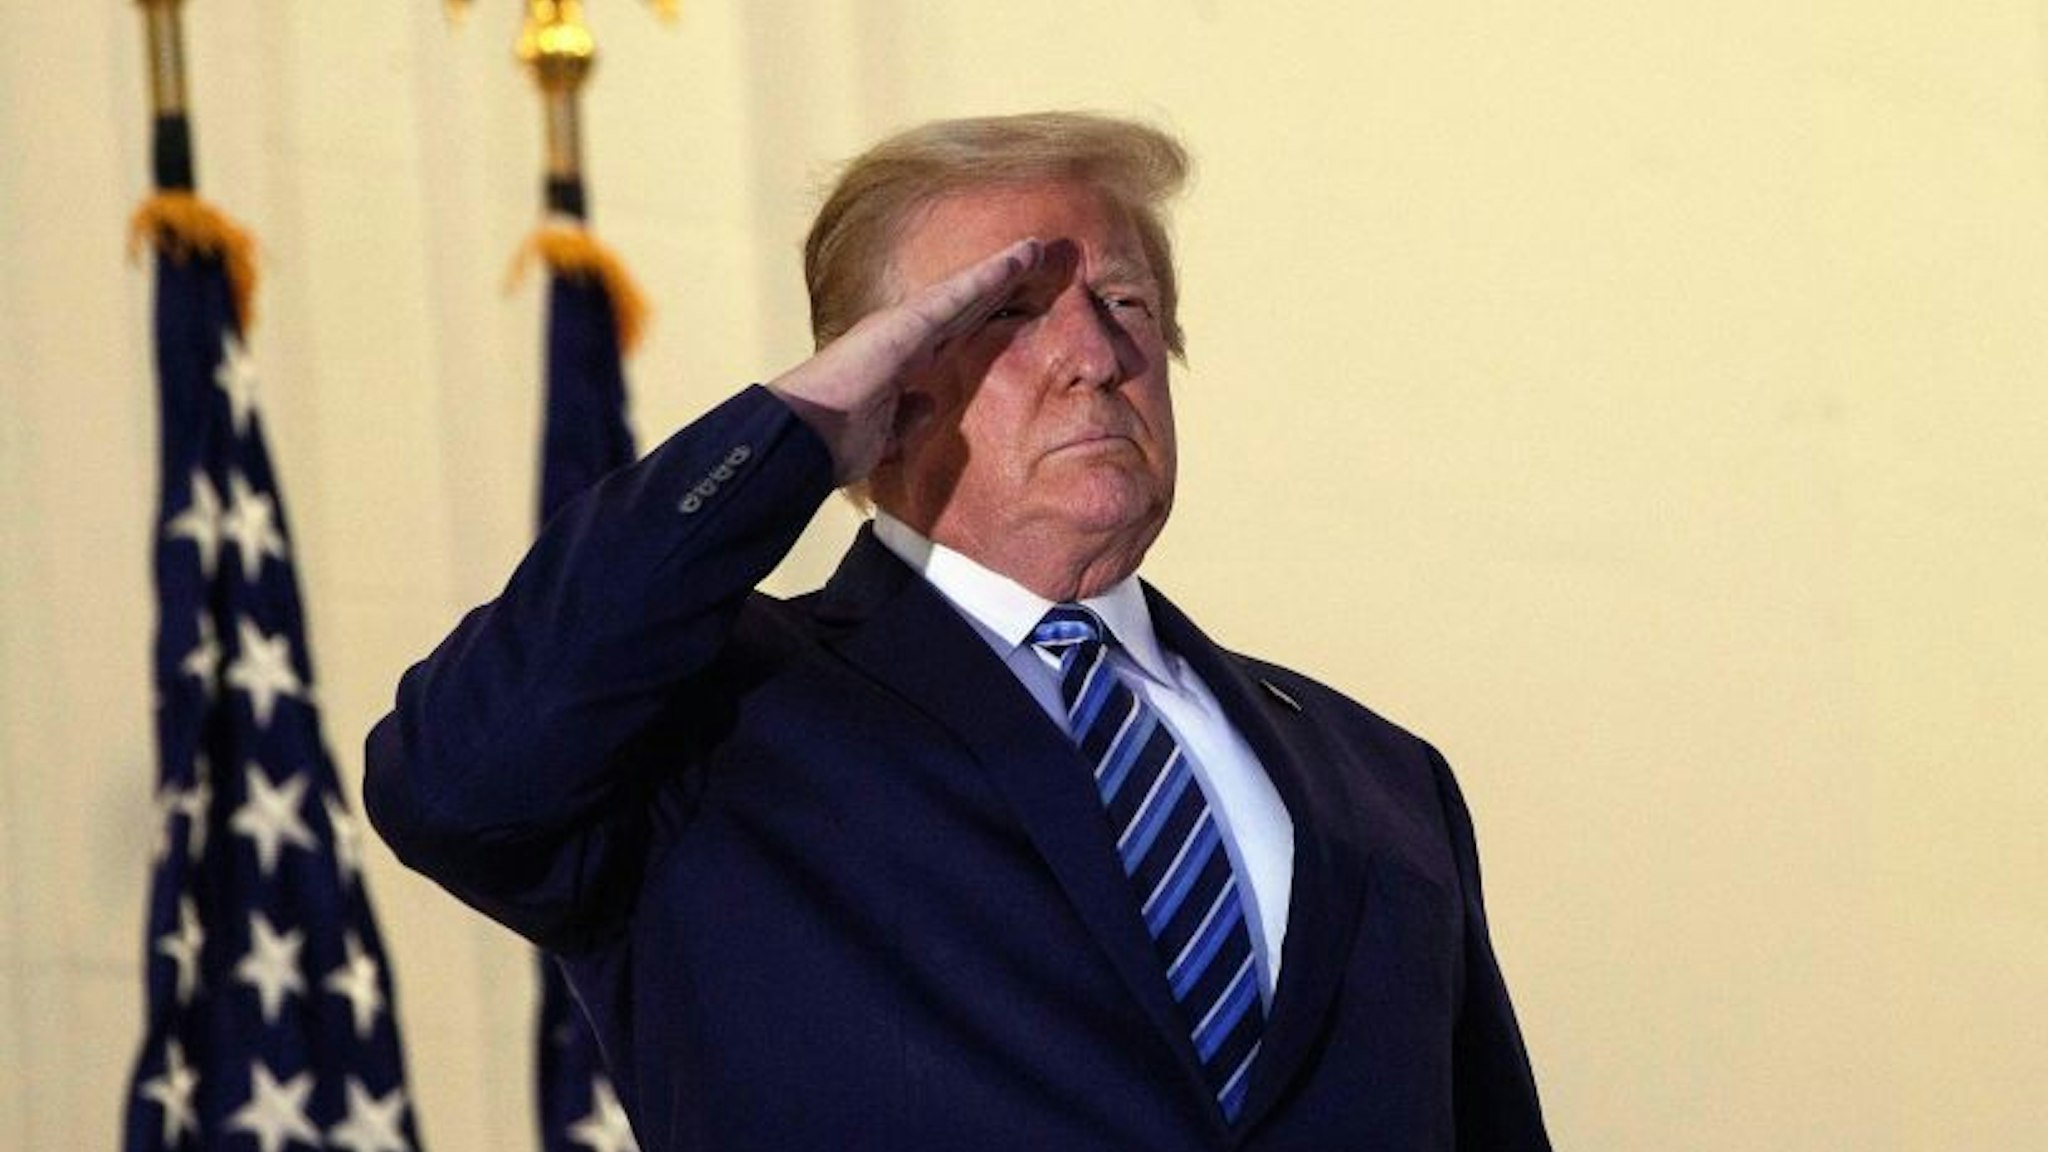 US President Donald Trump salutes from the Truman Balcony upon his return to the White House from Walter Reed Medical Center, where he underwent treatment for Covid-19, in Washington, DC, on October 5, 2020.